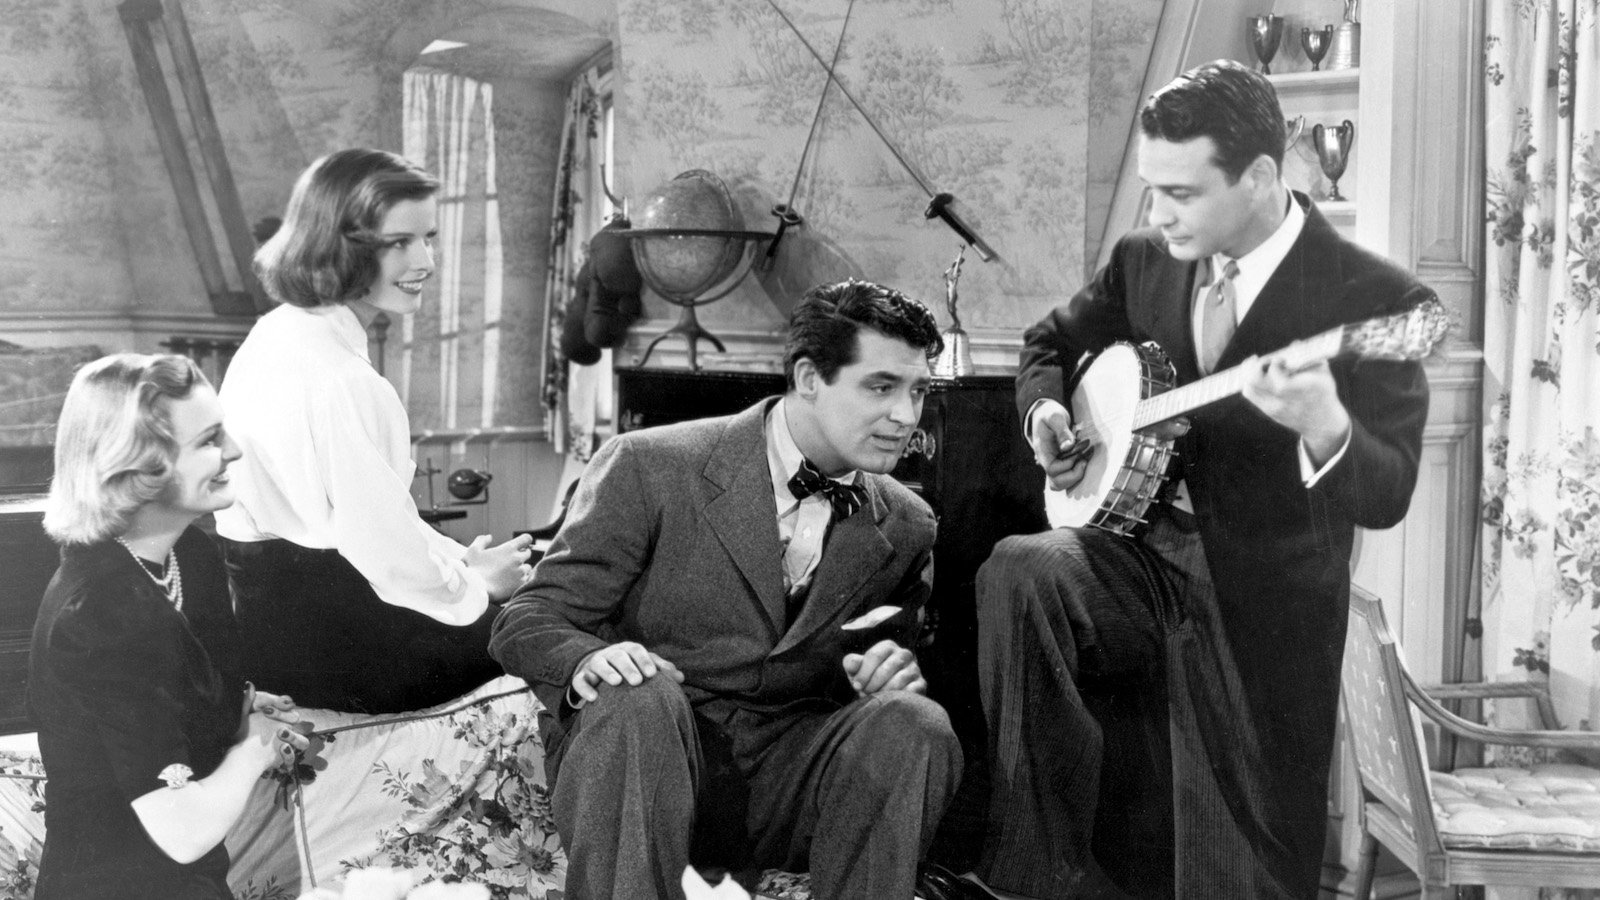 A man standing and playing a banjo on the right of the frame, with another man perched on a couch leaning his head in to listen to him and two women sitting on the other side of the couch